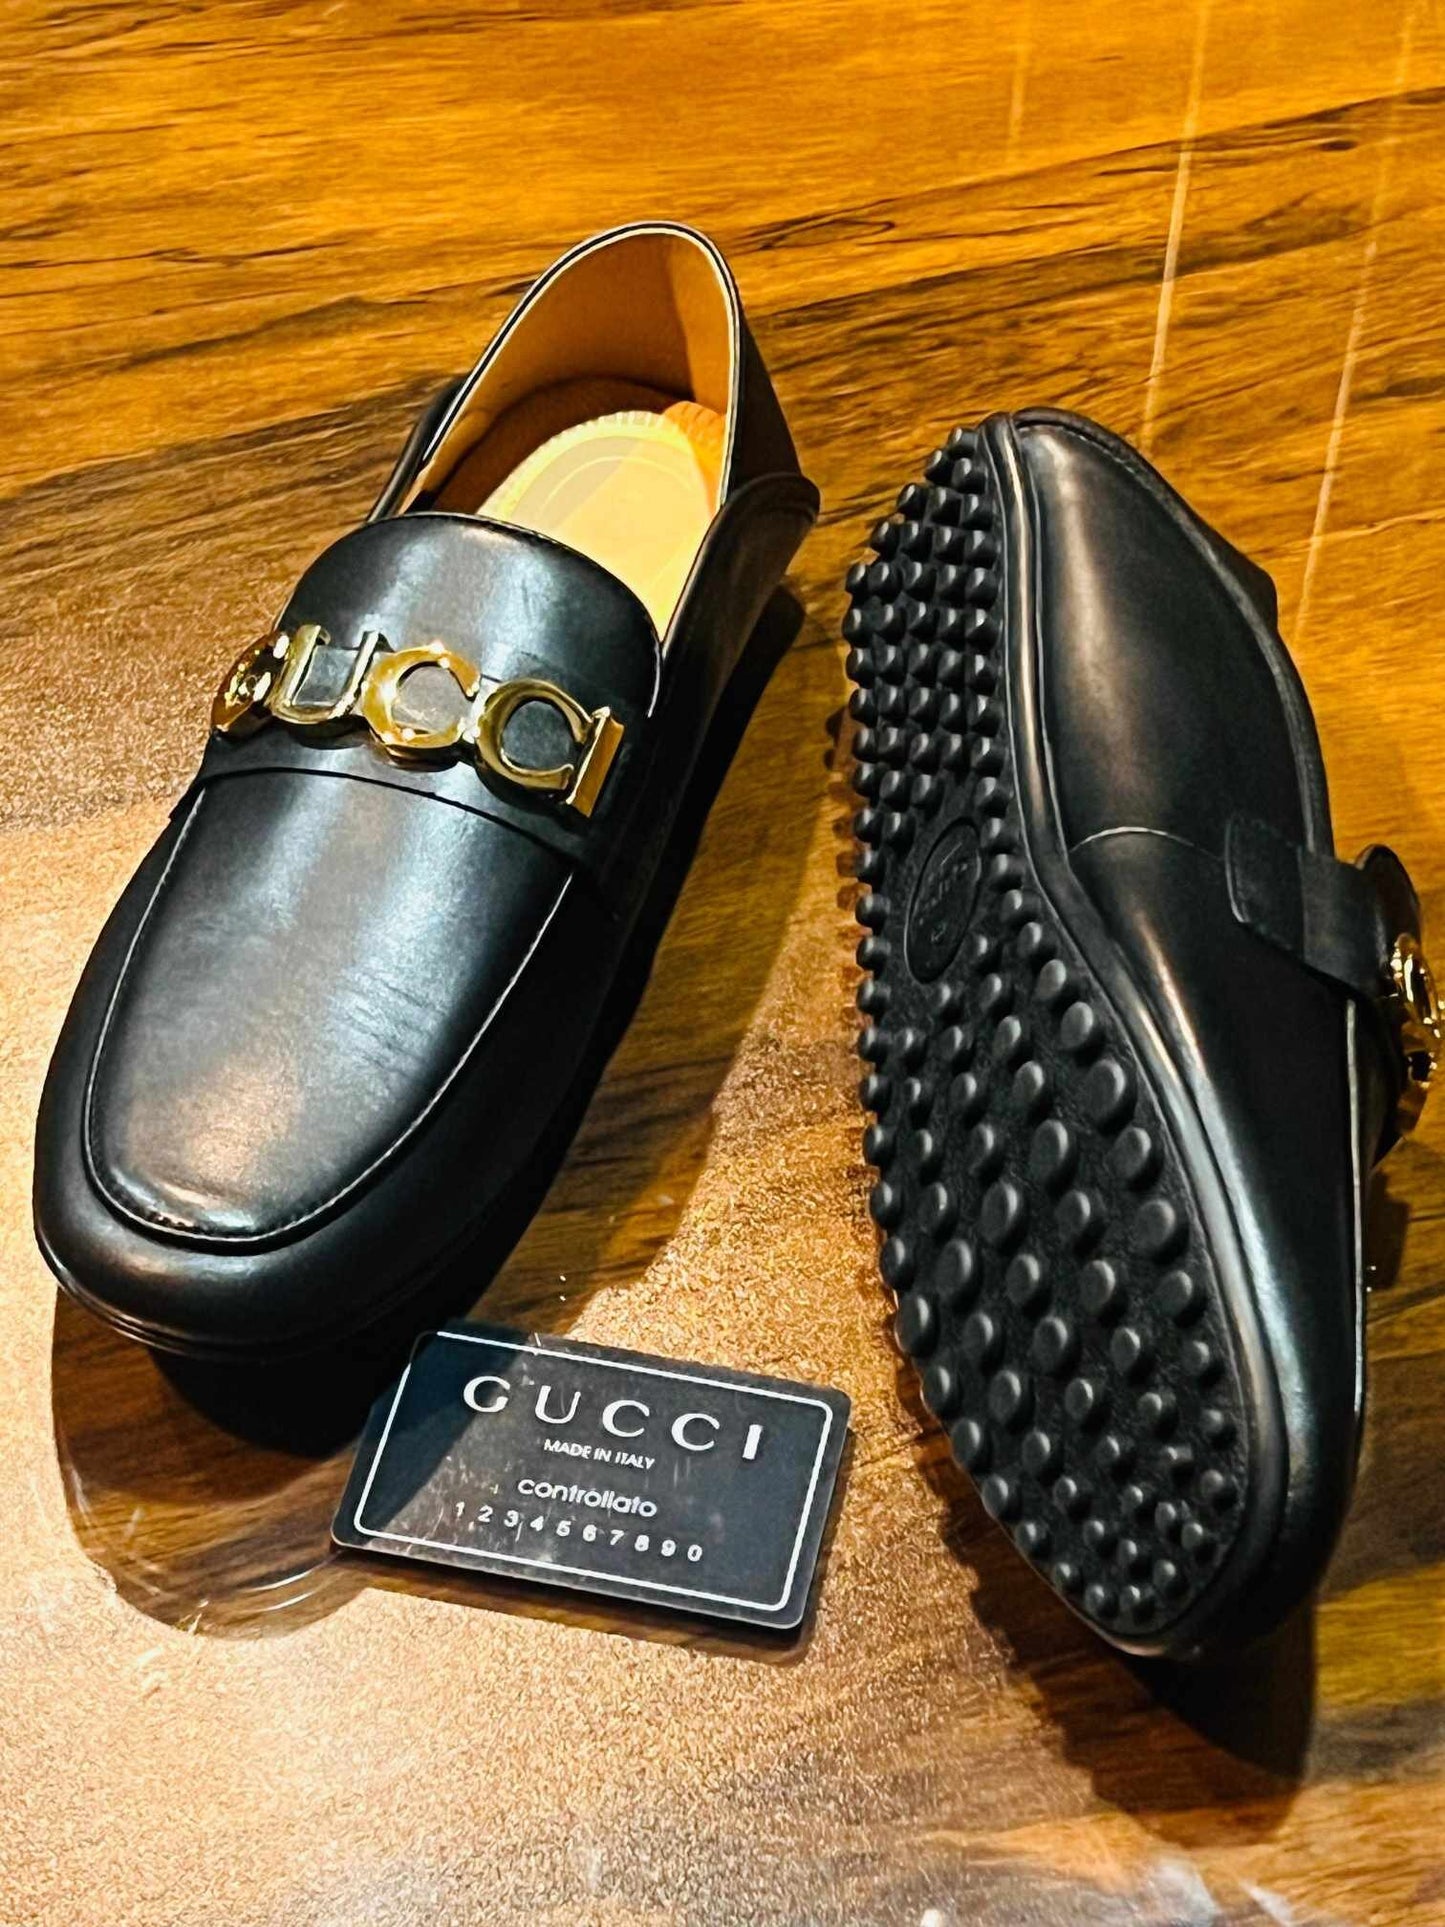 Gucci Shoes: The Ultimate Status Symbol